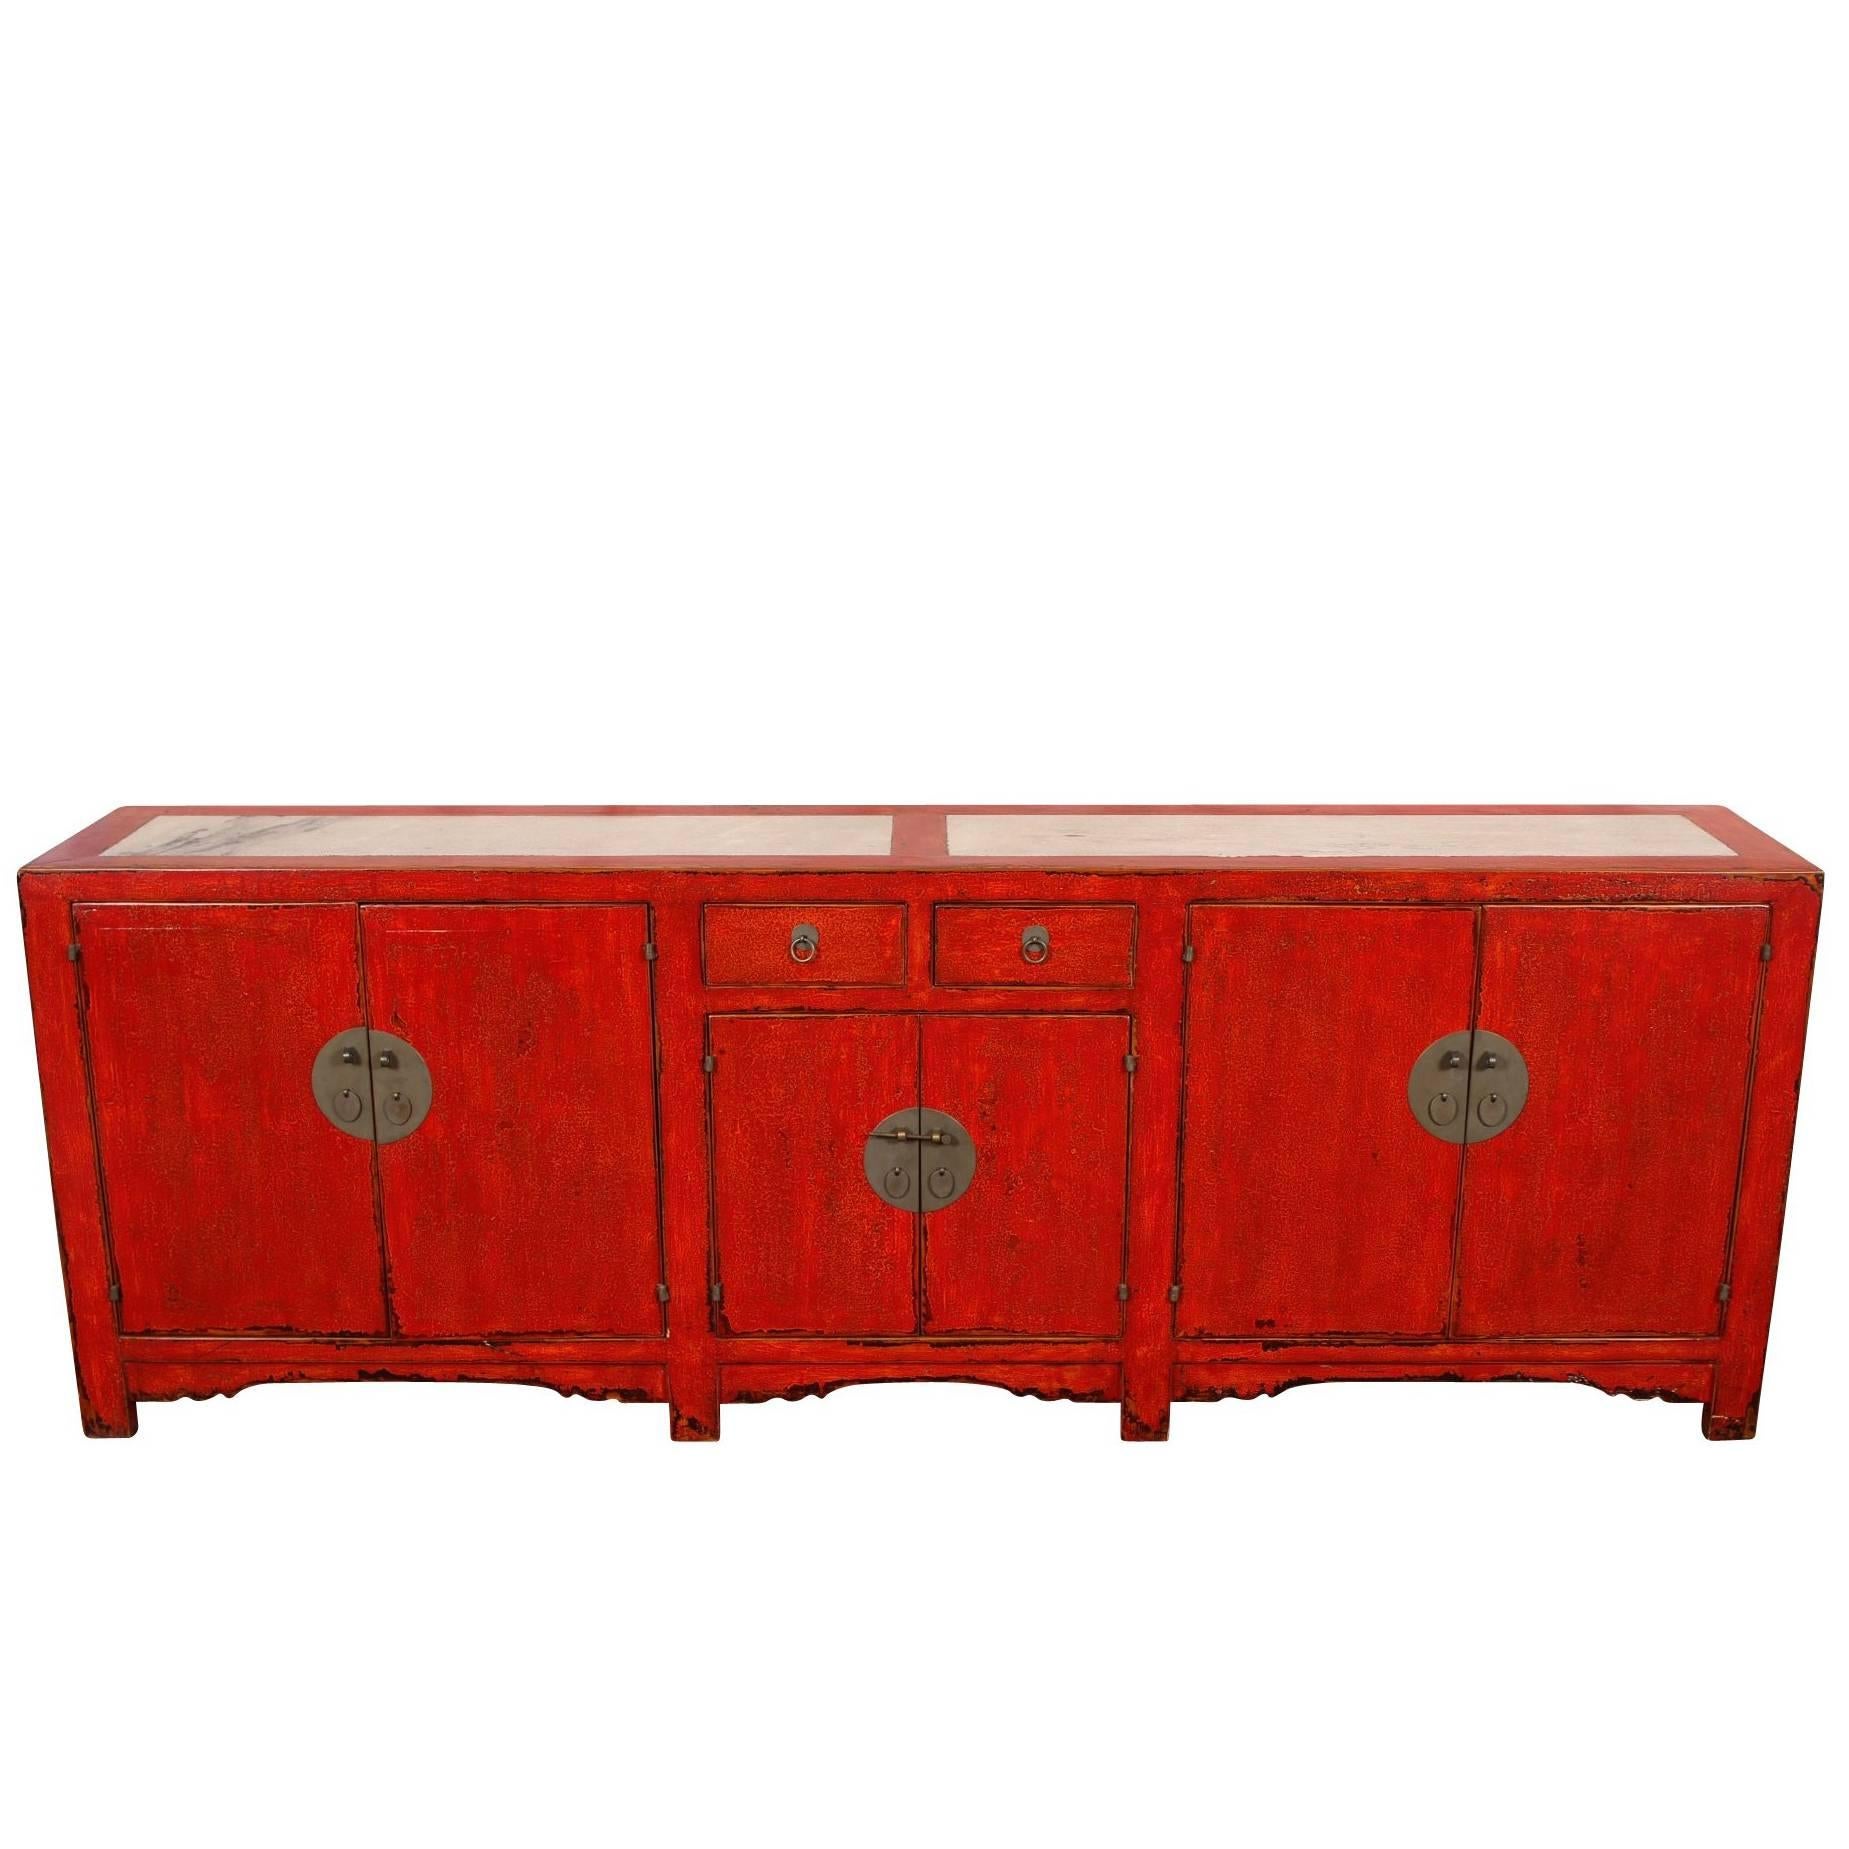 Red Lacquered Marble-Top Chinese Storage Cabinet